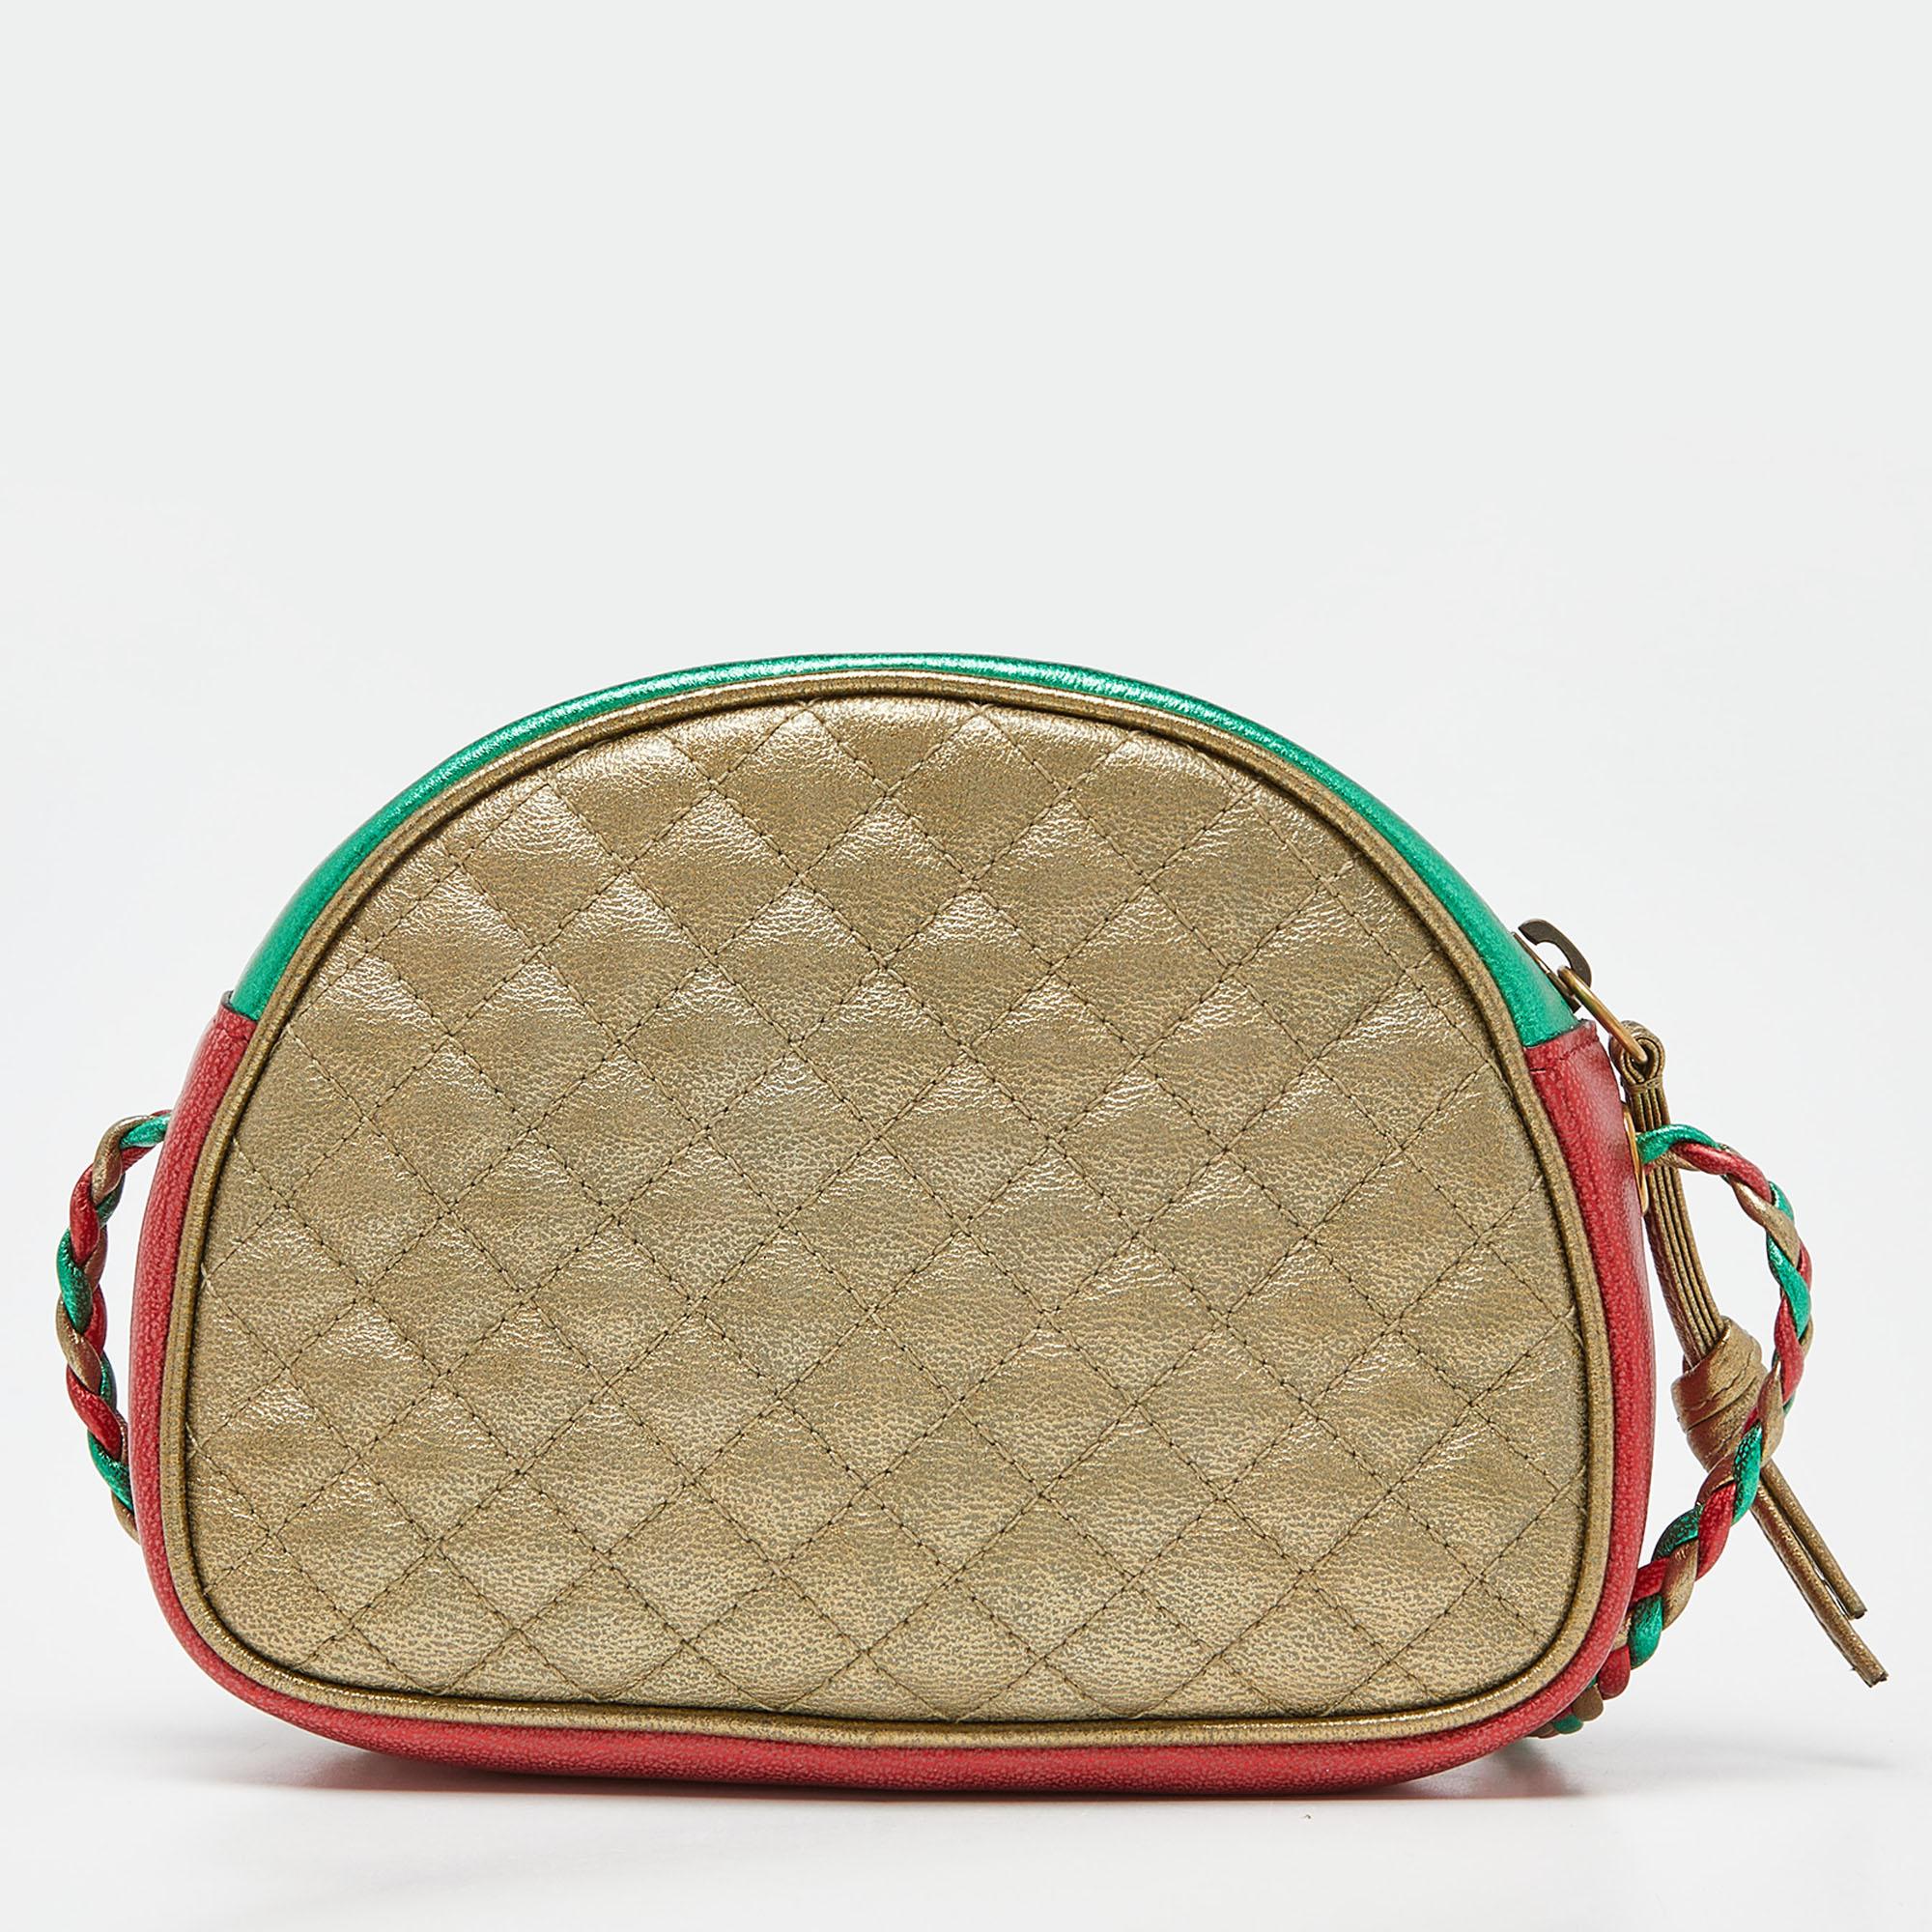 This mini Trapuntata crossbody bag by Gucci is a great option for carrying your essentials. This quilted leather bag has a compact size with a signature motif on the front and a zipper to secure the fabric-leather interior. Designed to be ideal for